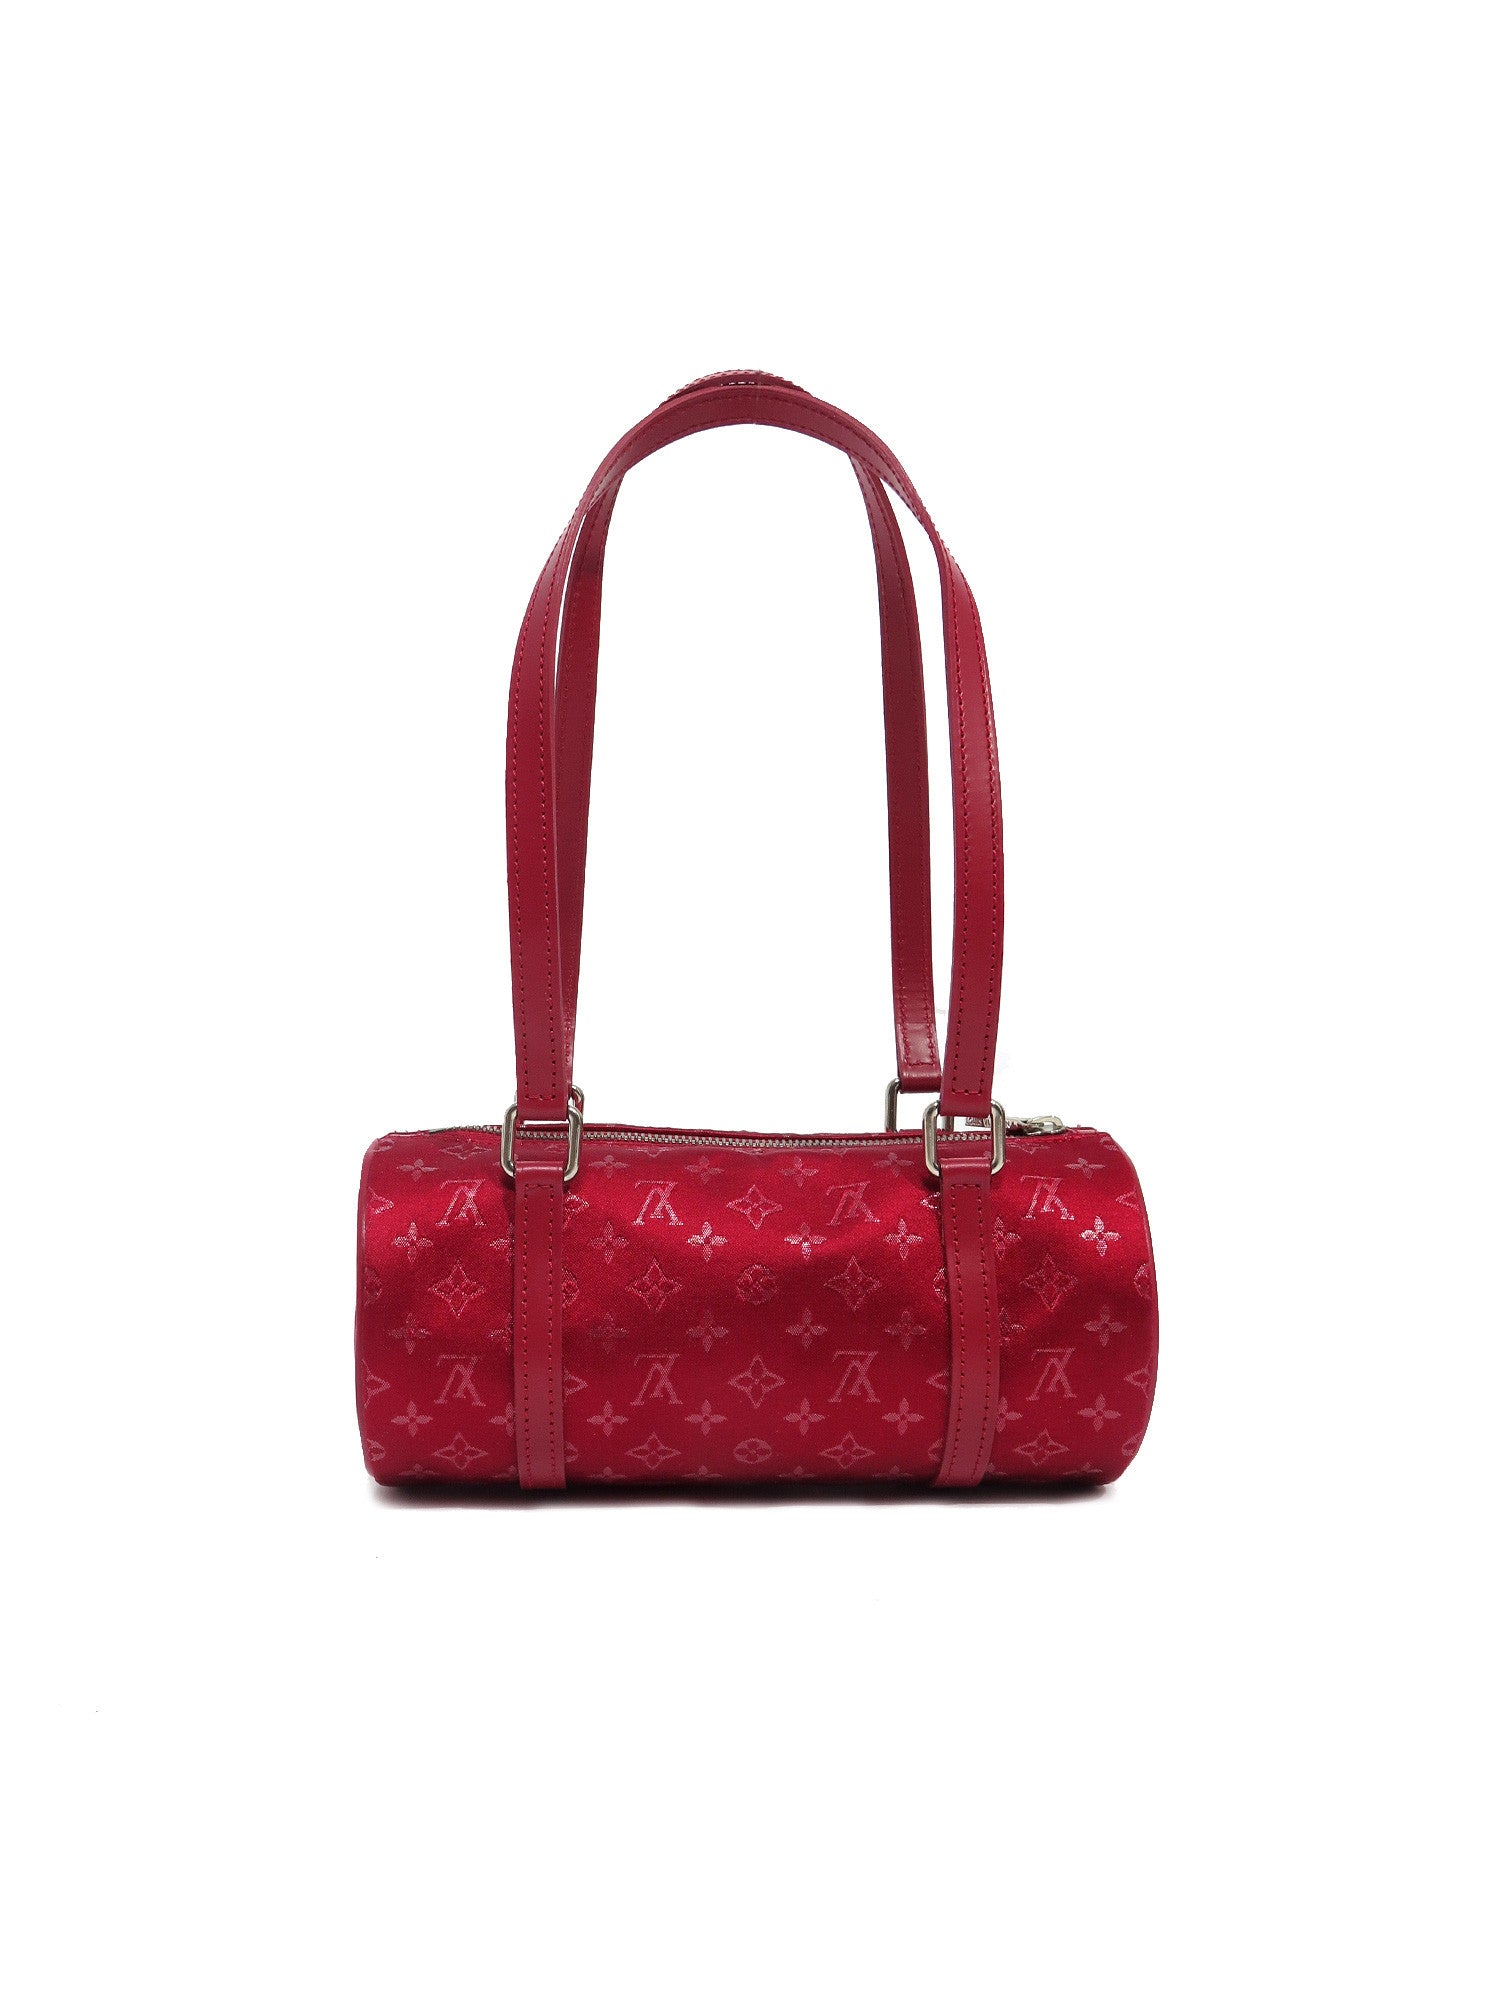 lv red small bag